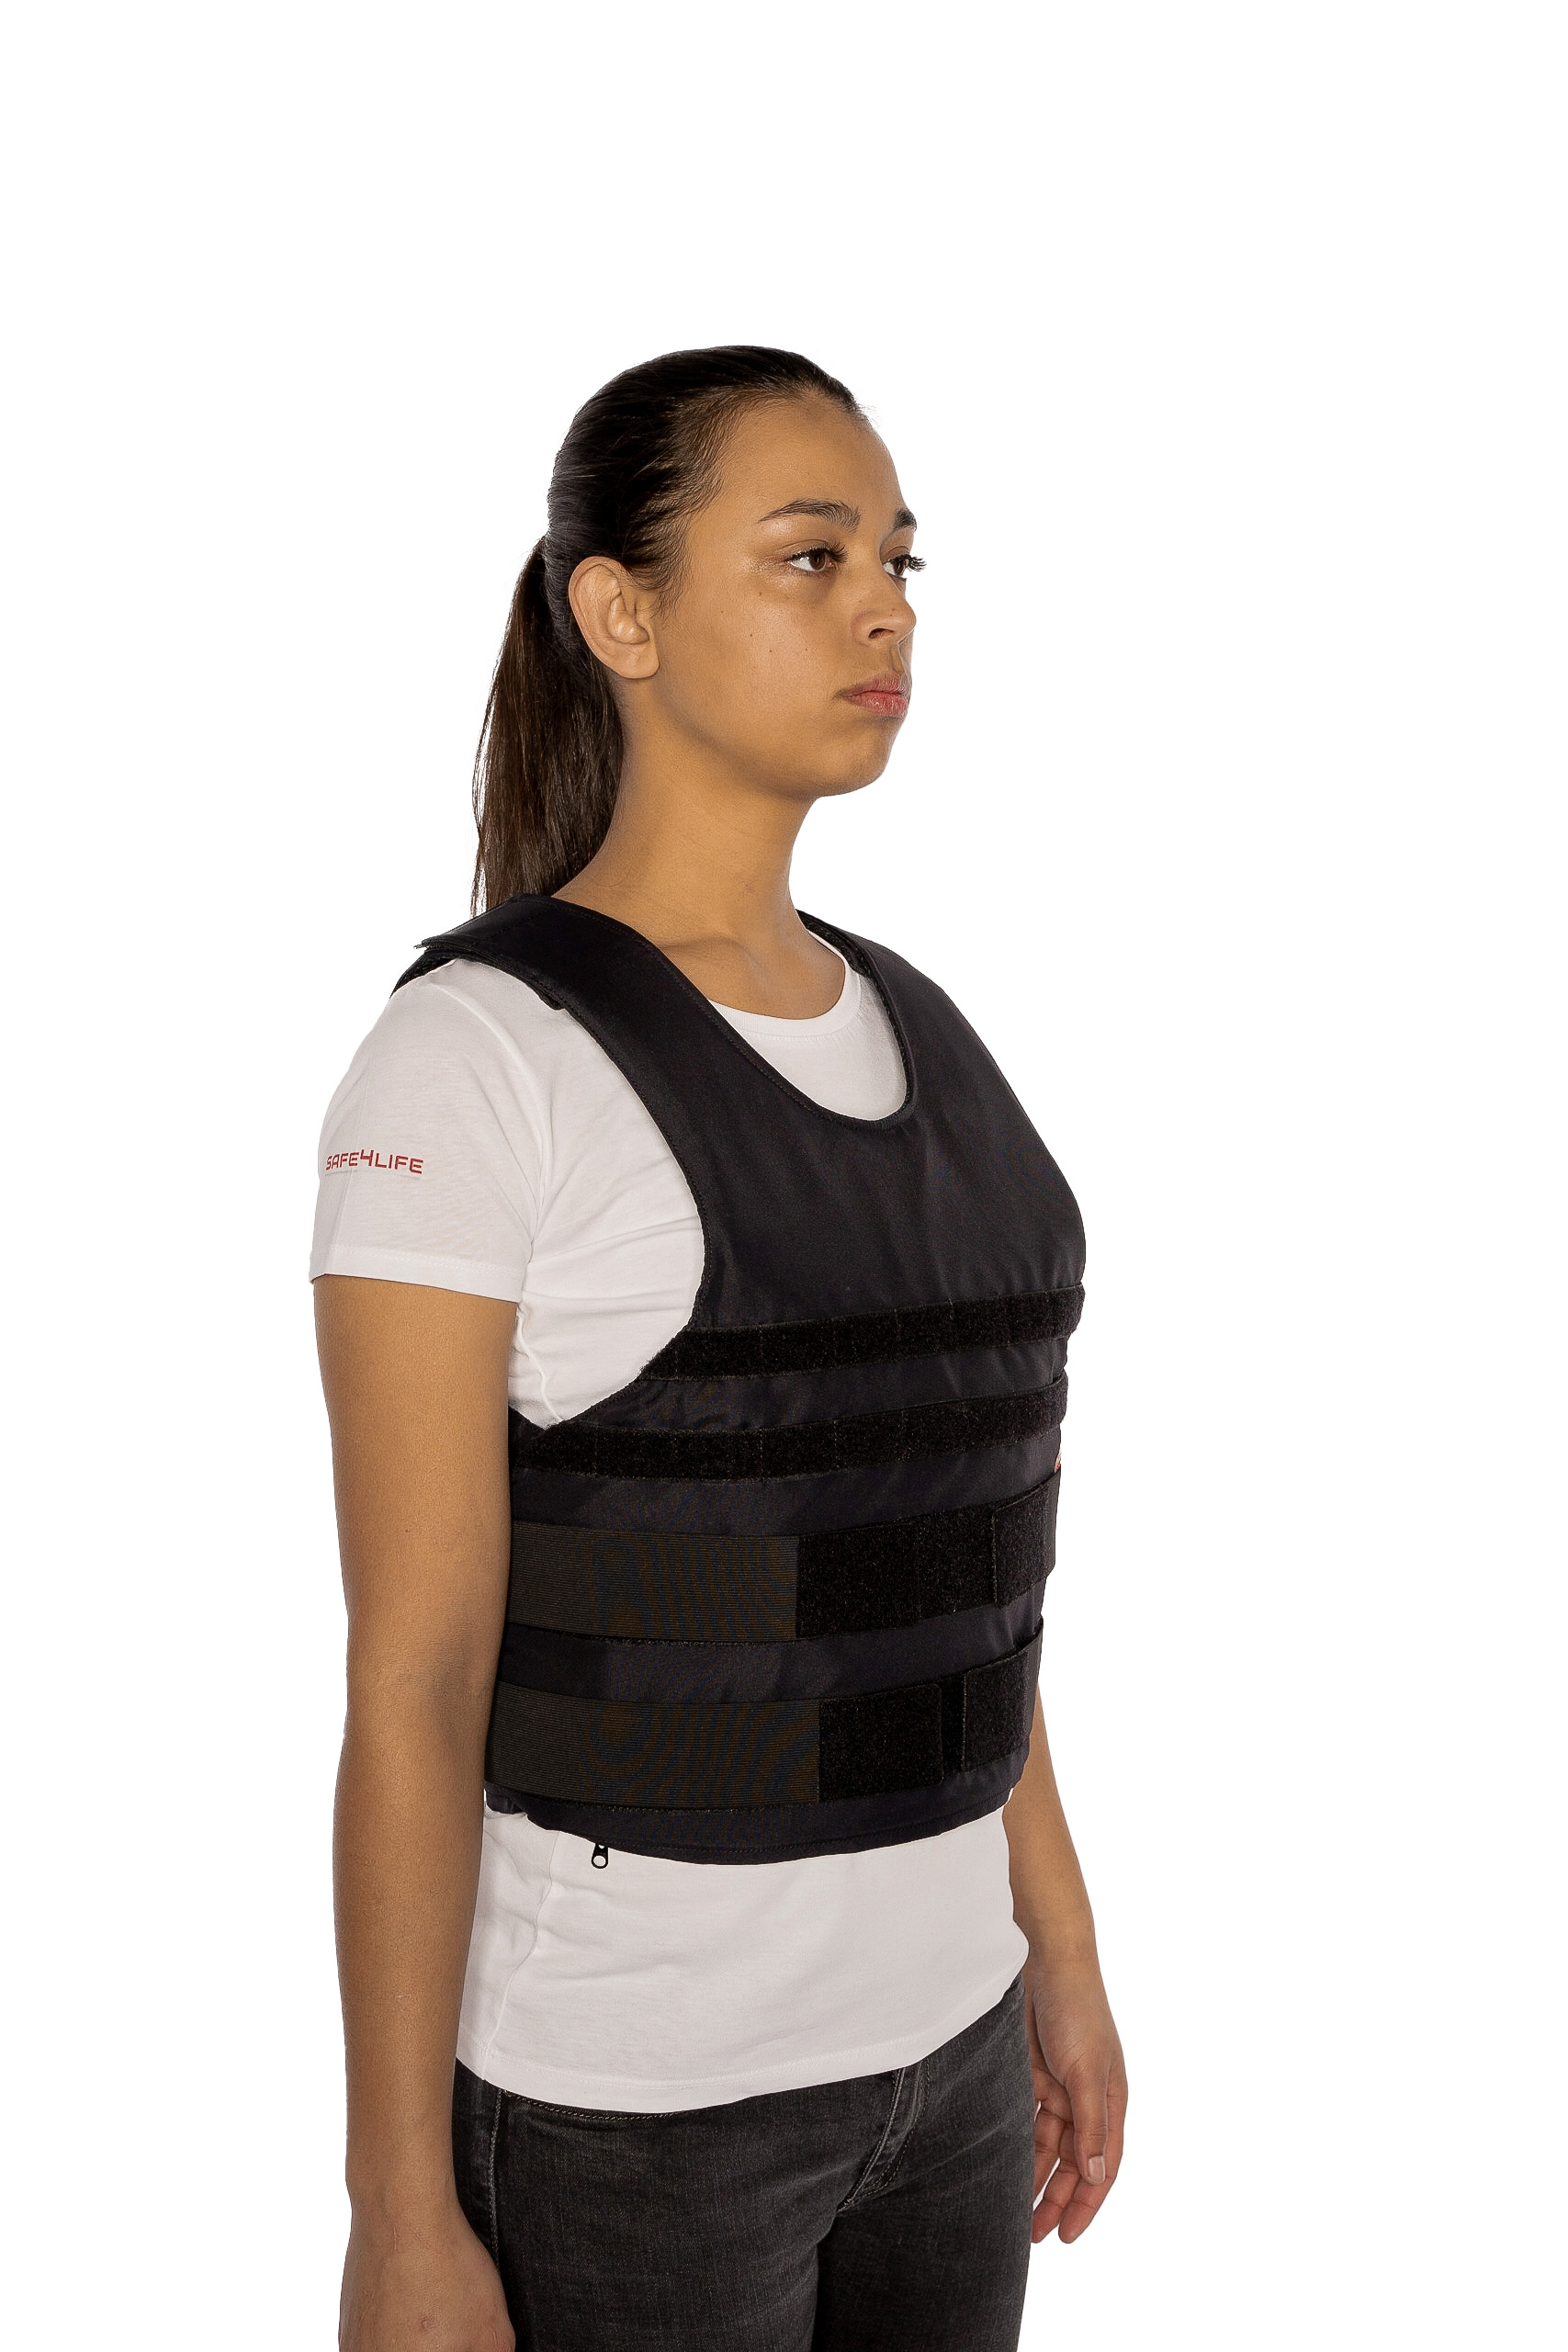 S4L -  Concealable carrier "Sara"